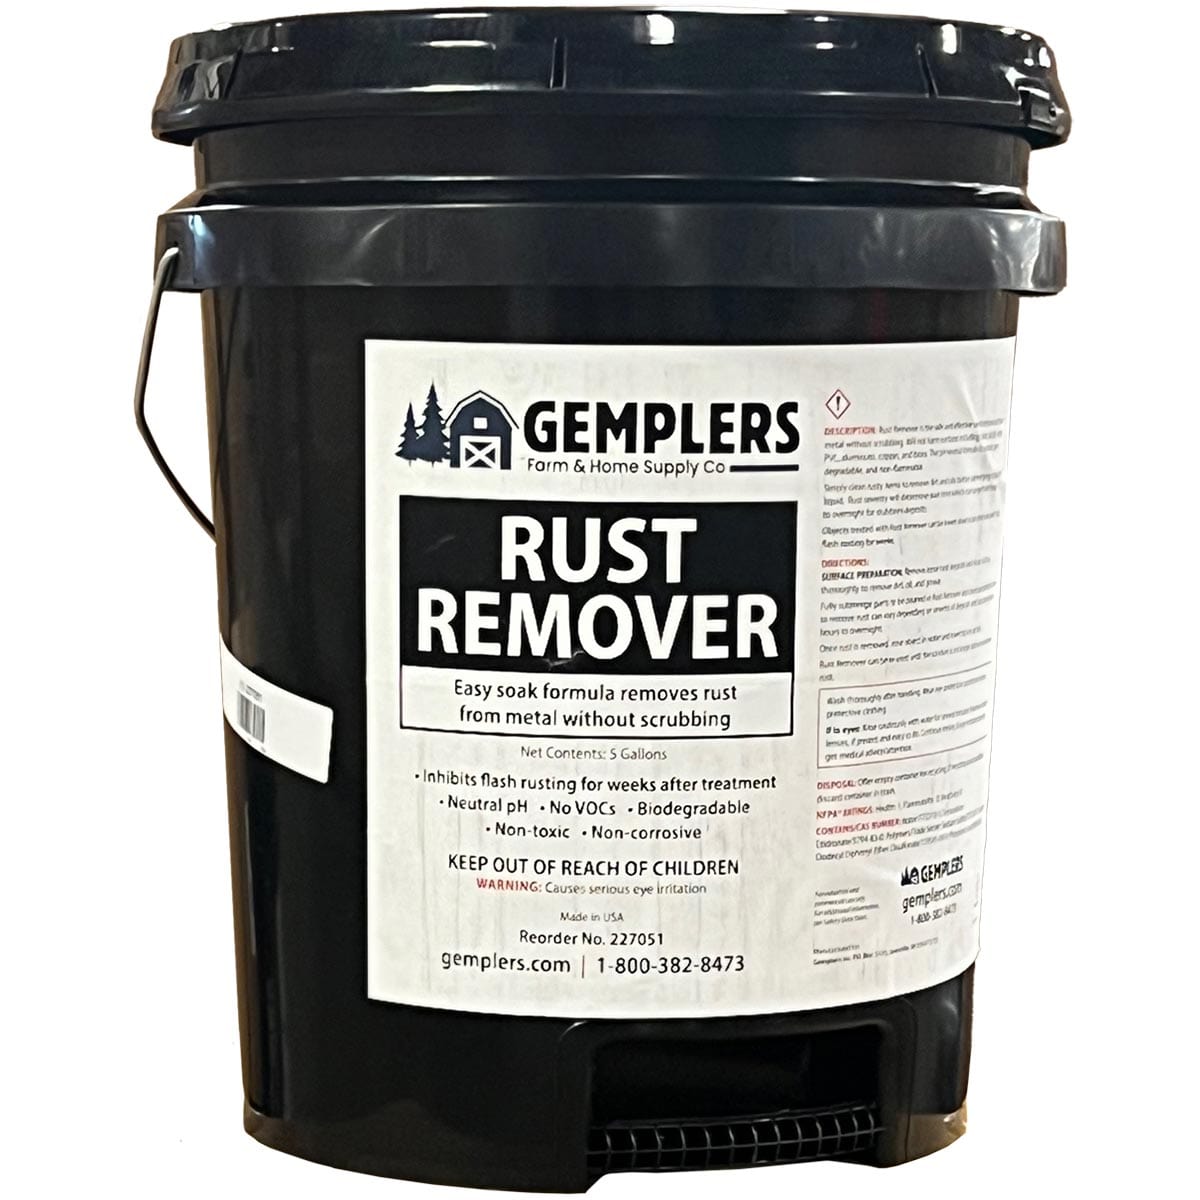 Gemplers Rust Remover - 5 gal.